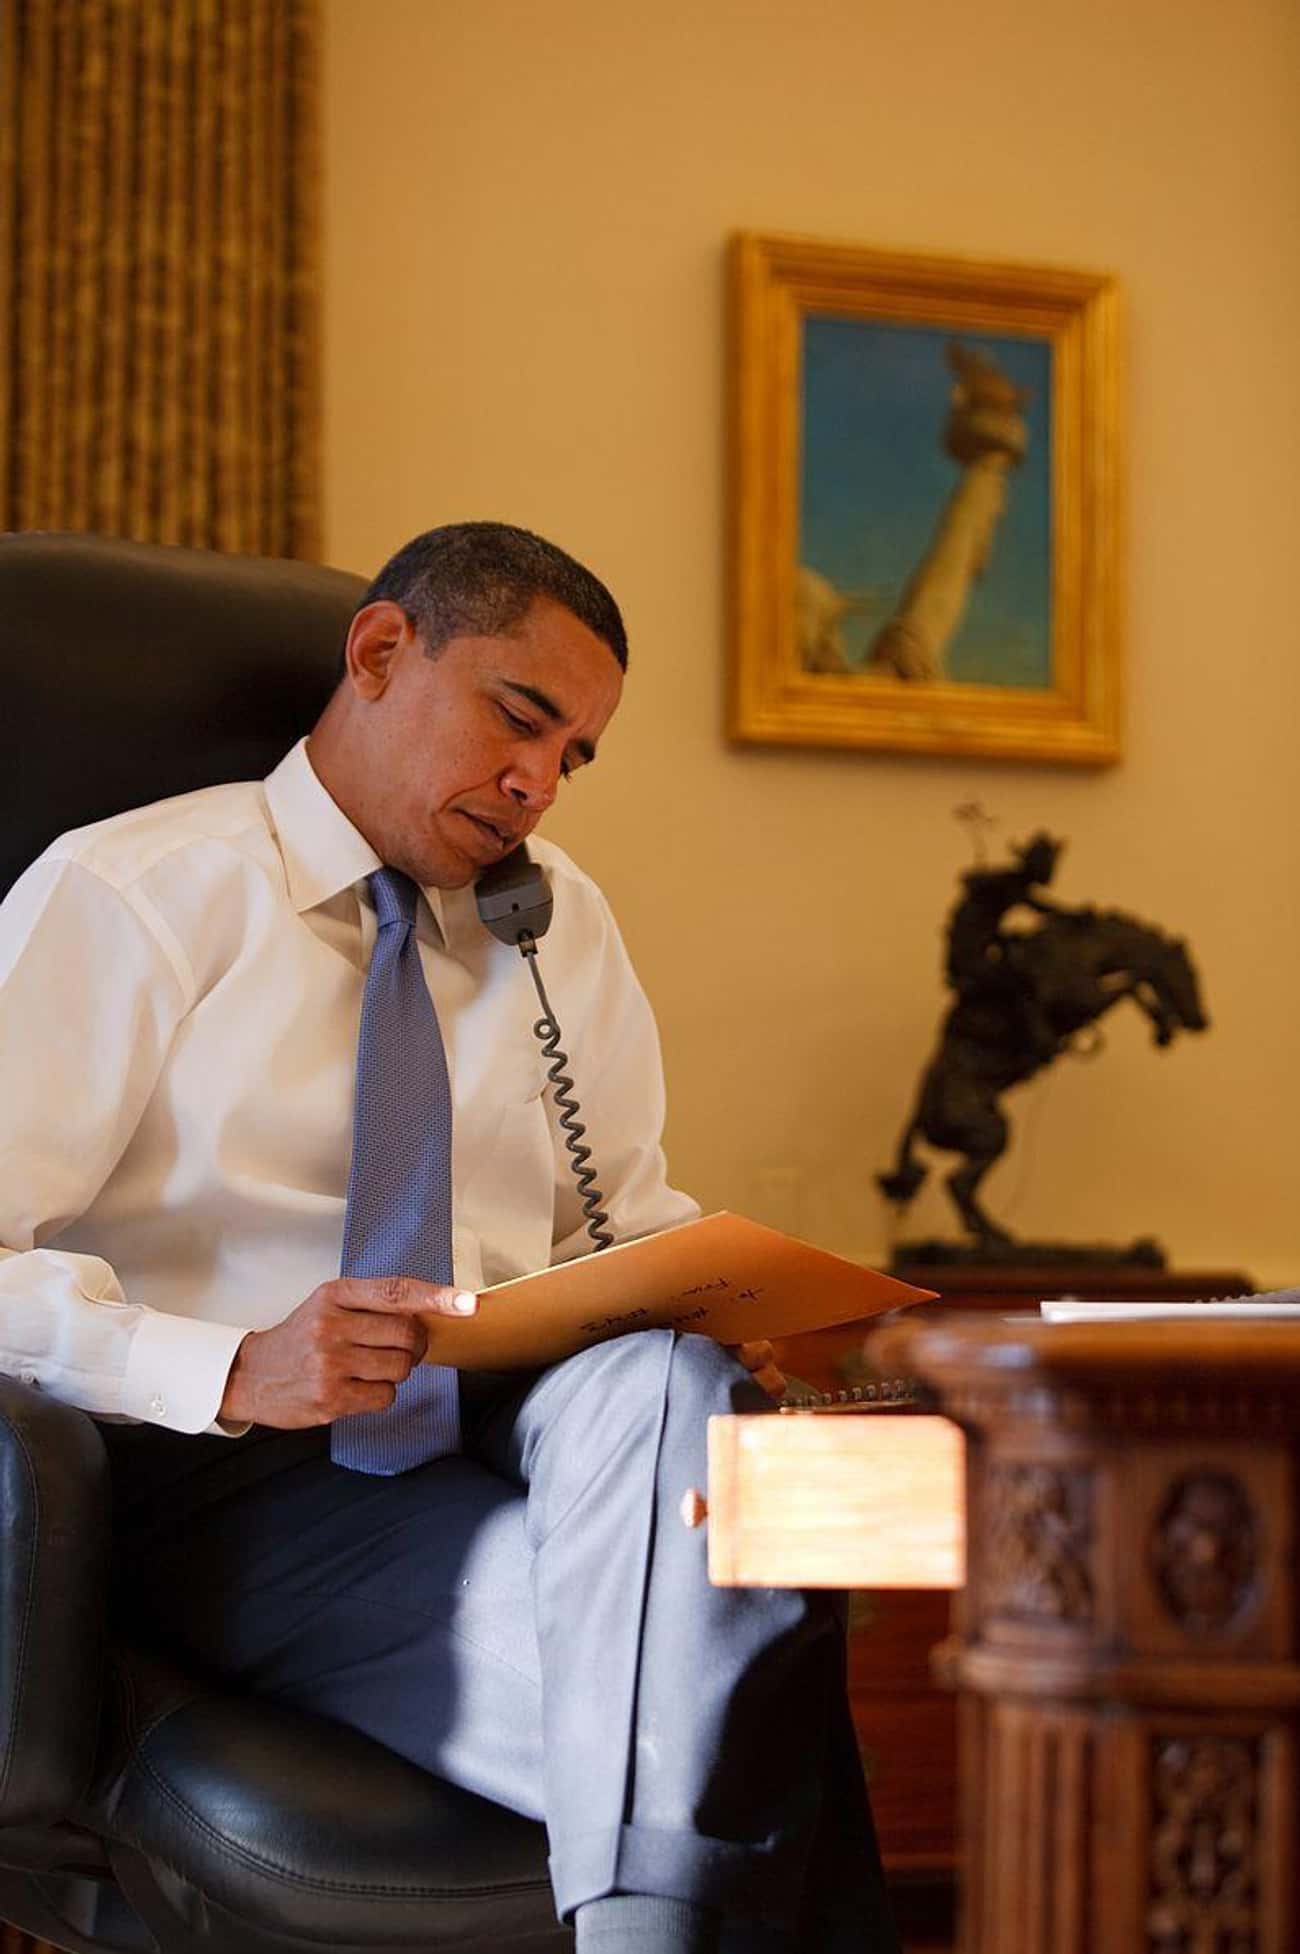 President Obama Admitted The Book Was Real During His First Year In Office